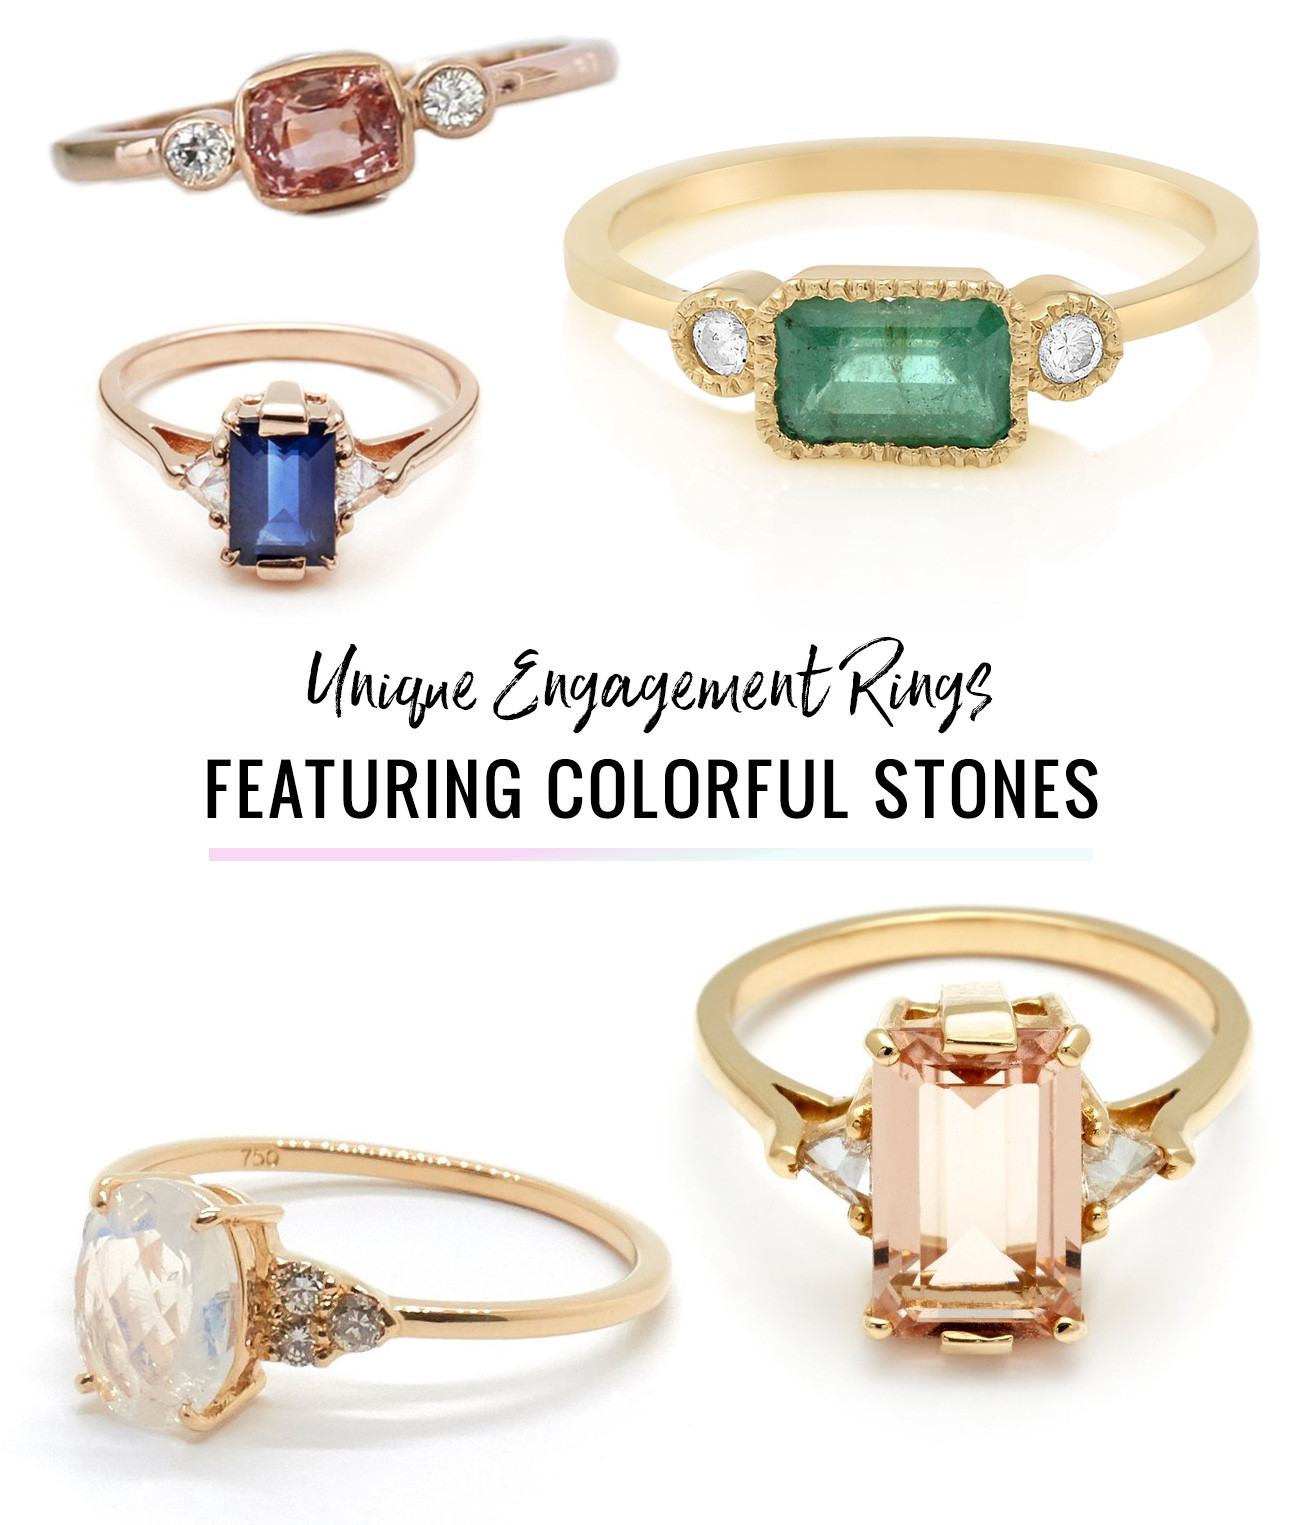 Alternative Wedding Rings
 Ditch the Diamond — Alternative Engagement Rings Featuring